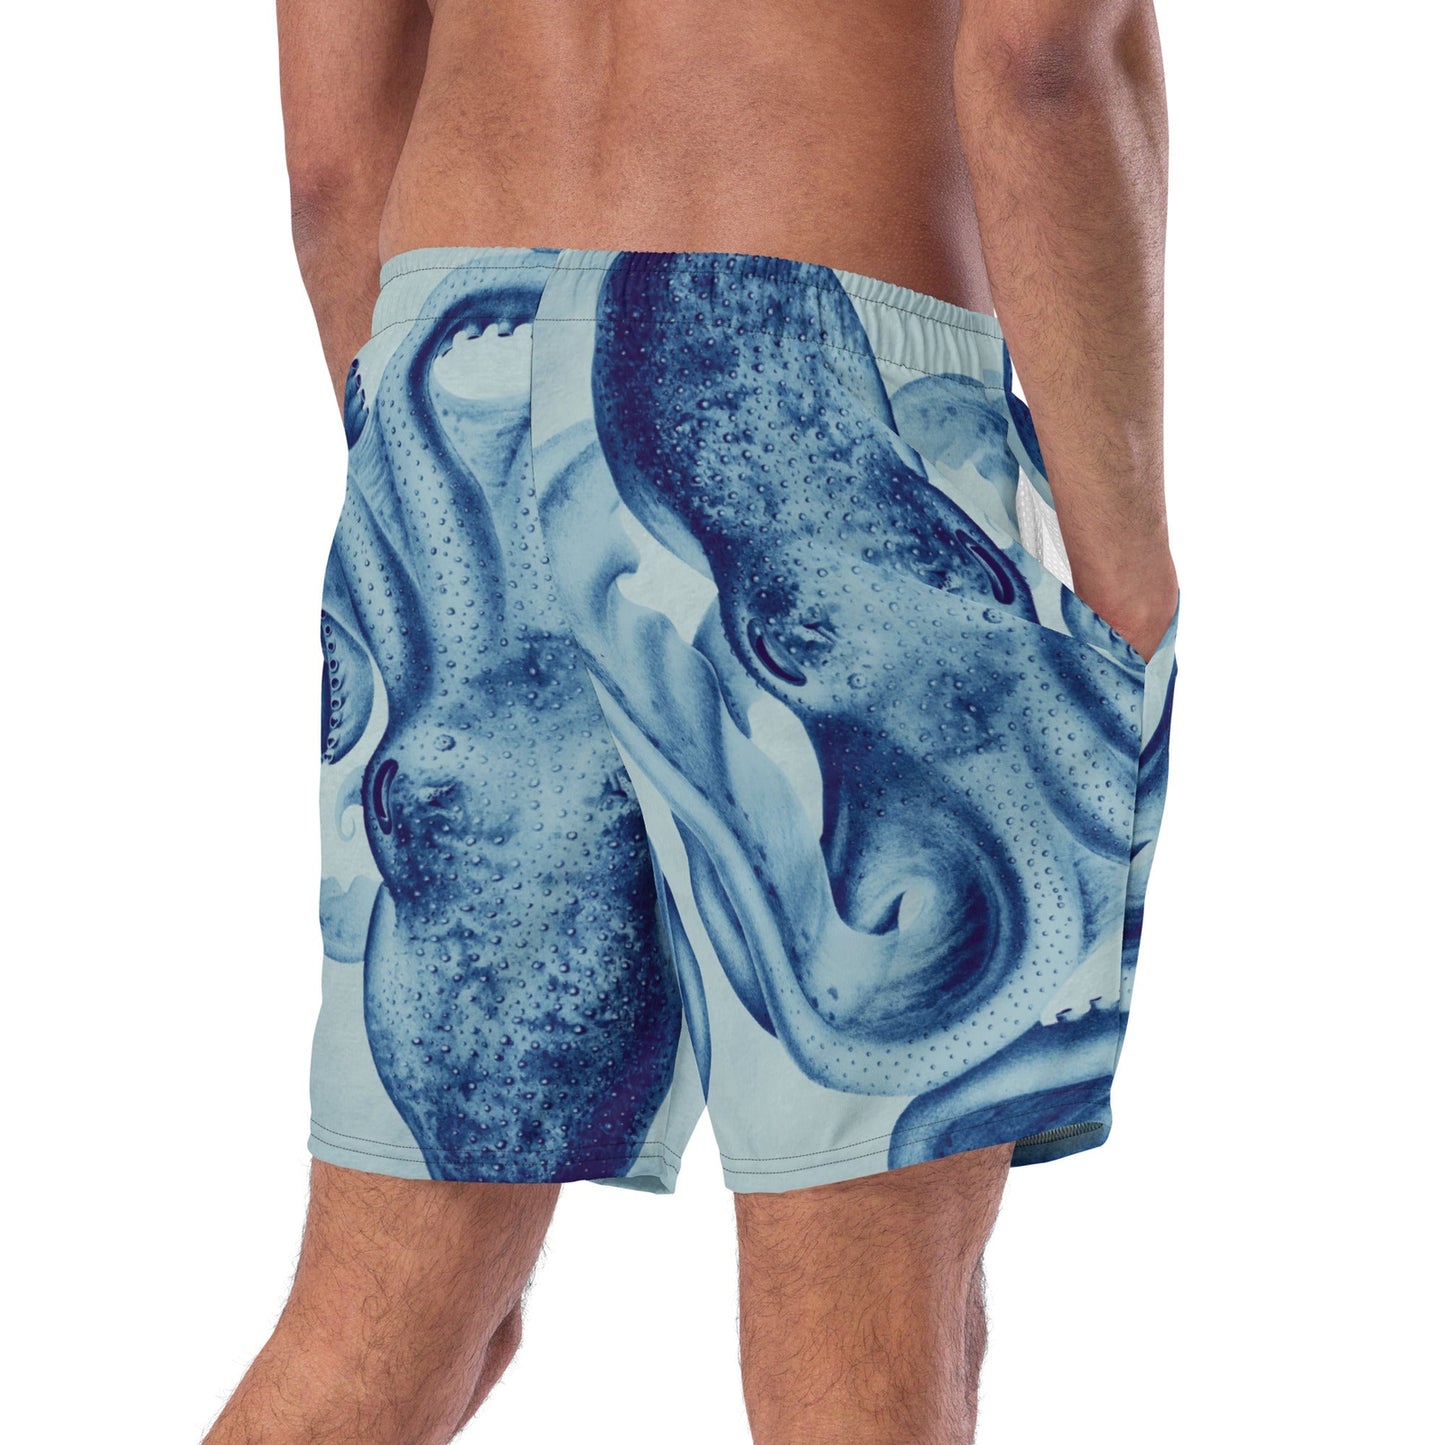 Octopus - men's swim trunks made from recycled polyester